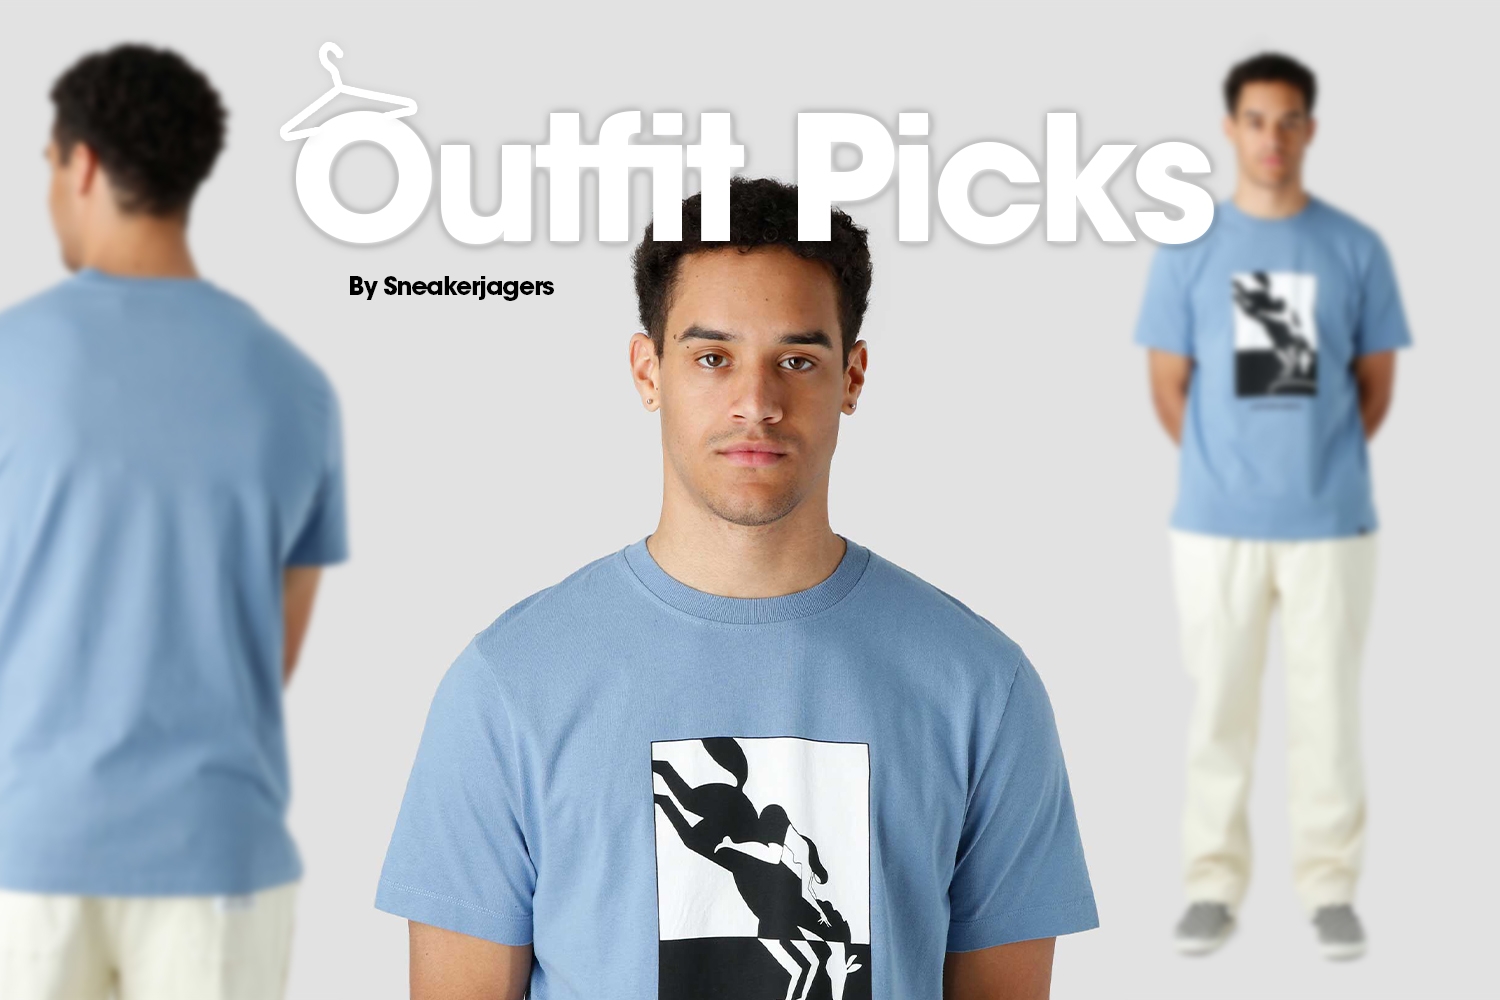 Outfit Picks by FotomagazinShops - week 22